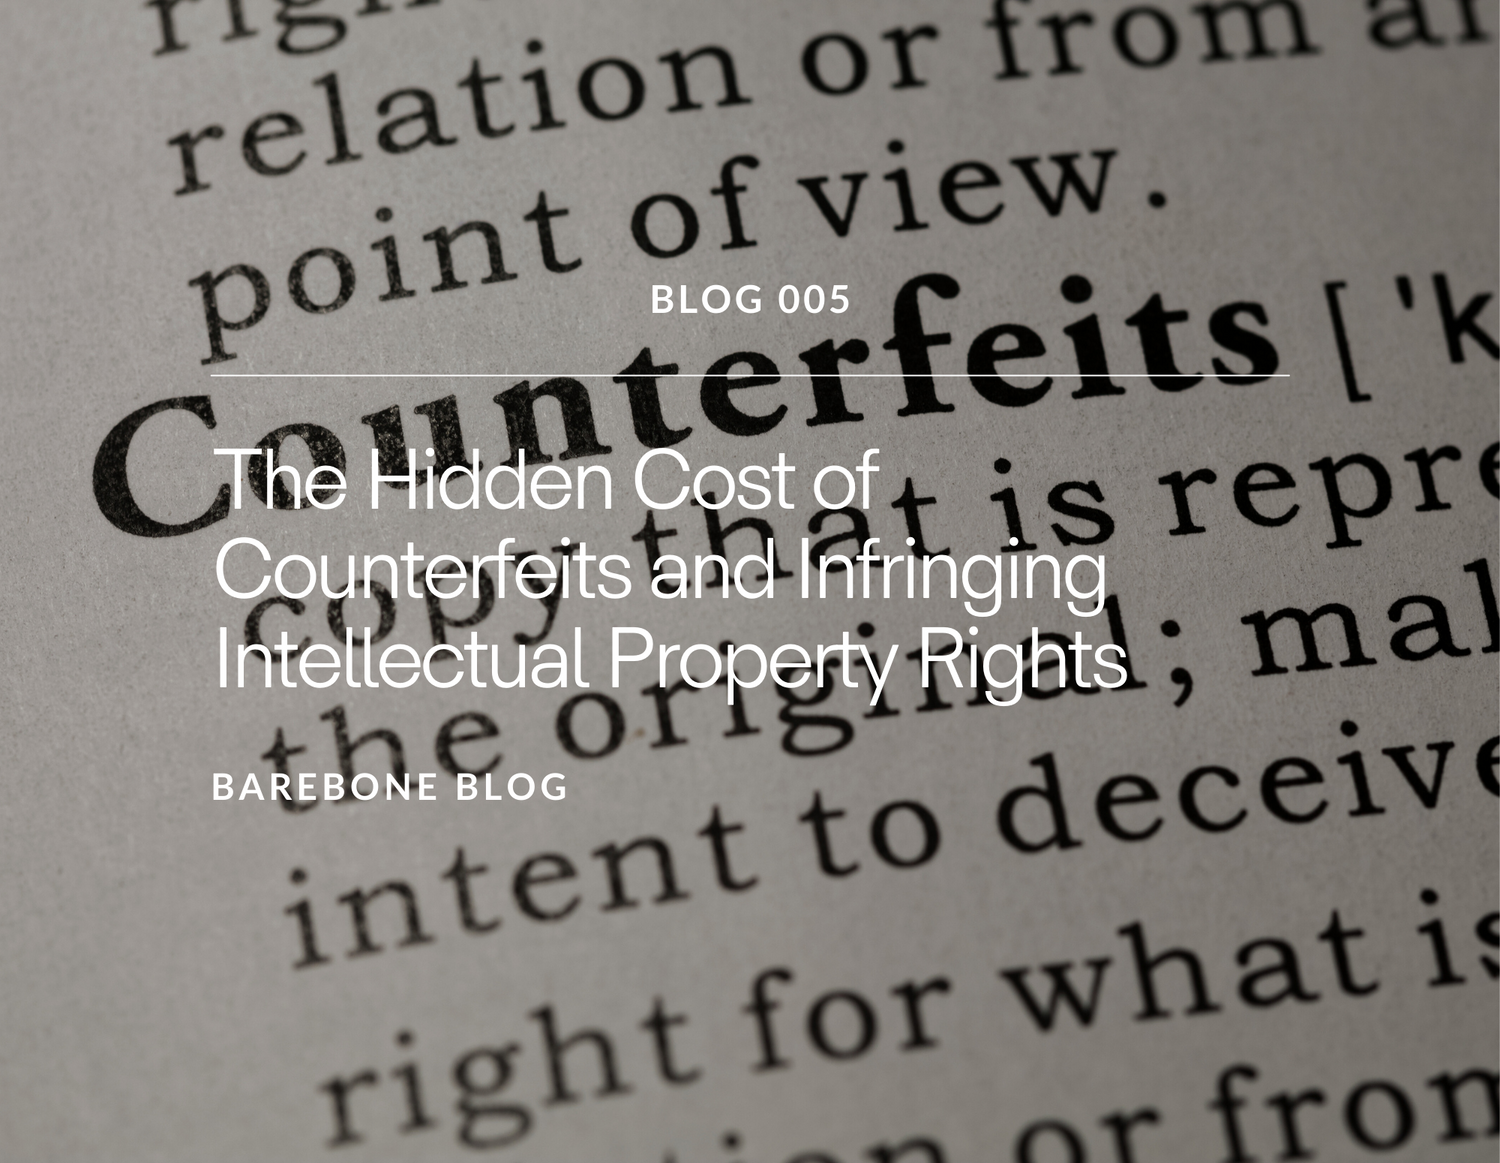 The Hidden Cost of Counterfeits and Infringing Intellectual Property Rights